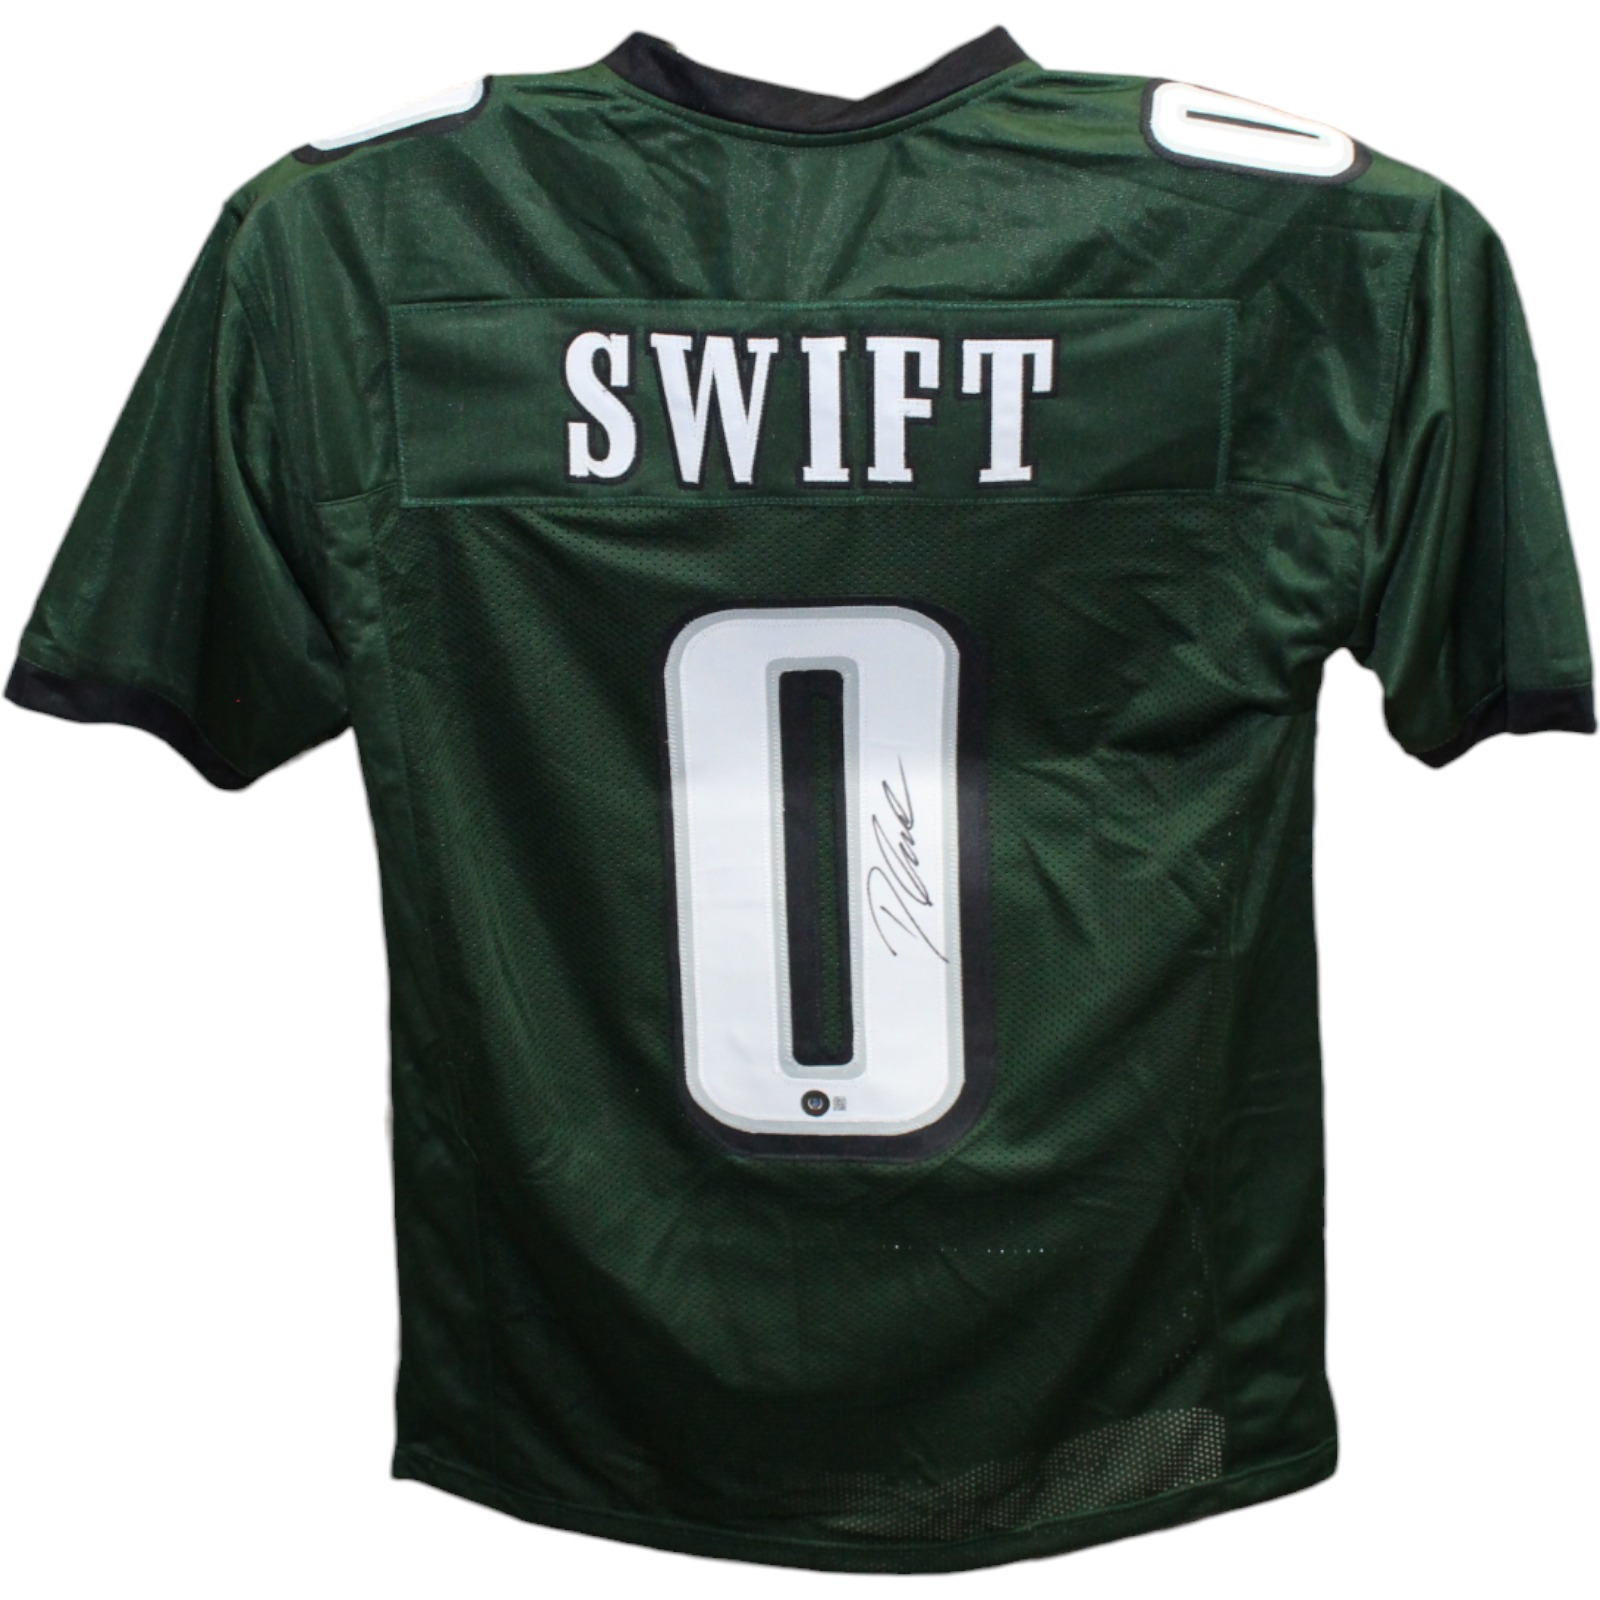 D'Andre Swift Autographed/Signed Pro Style Green Jersey Beckett